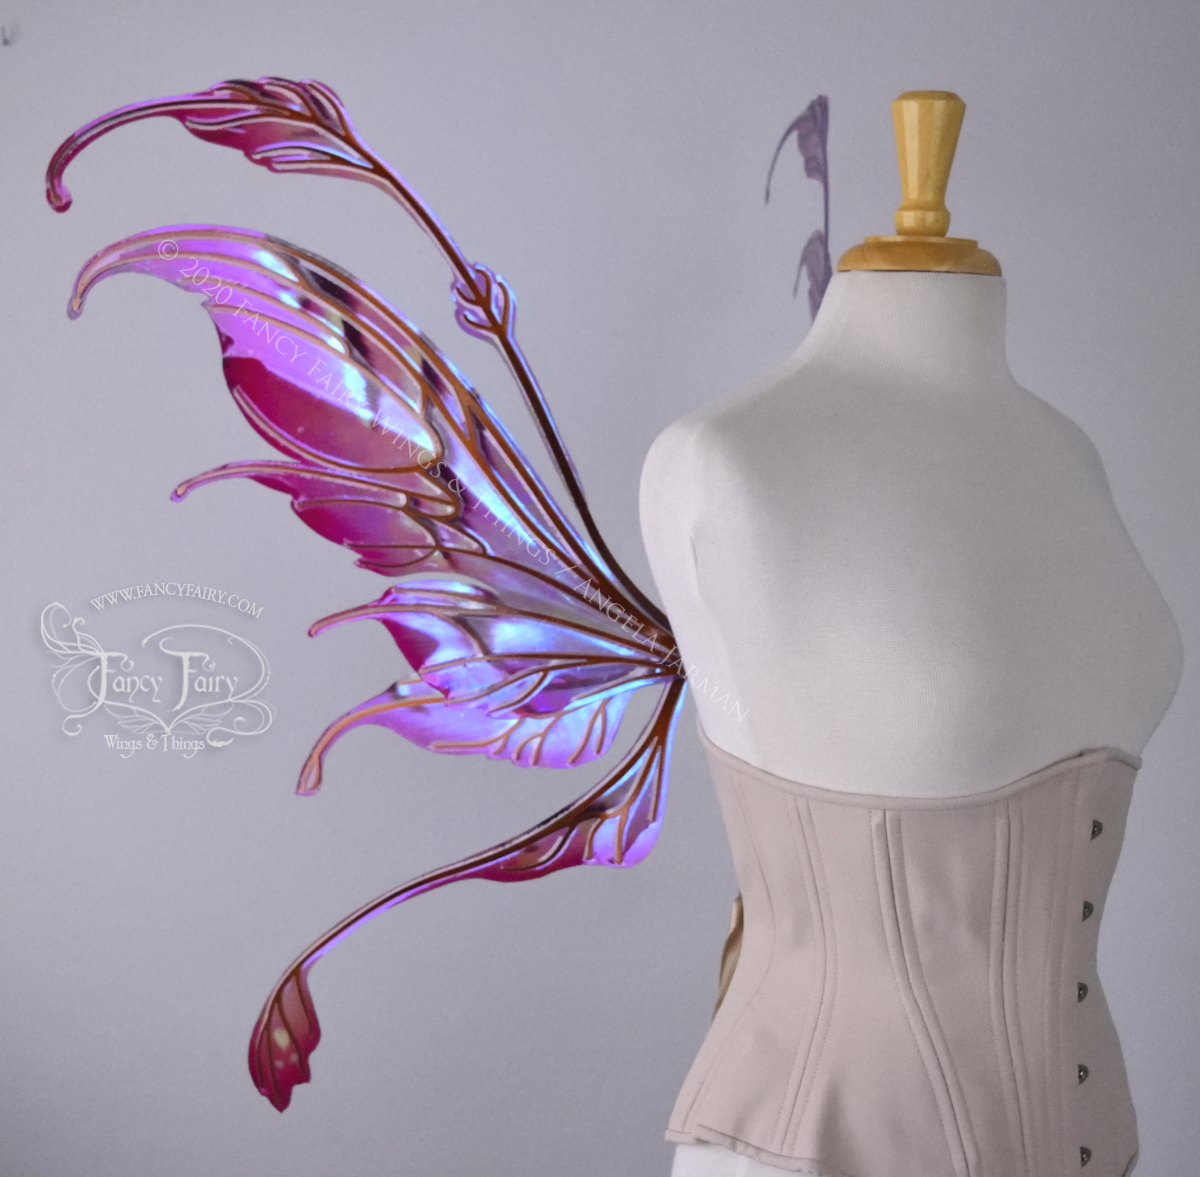 Fauna "Autumn Wine" Iridescent Painted Convertible Fairy Wings with Copper veins